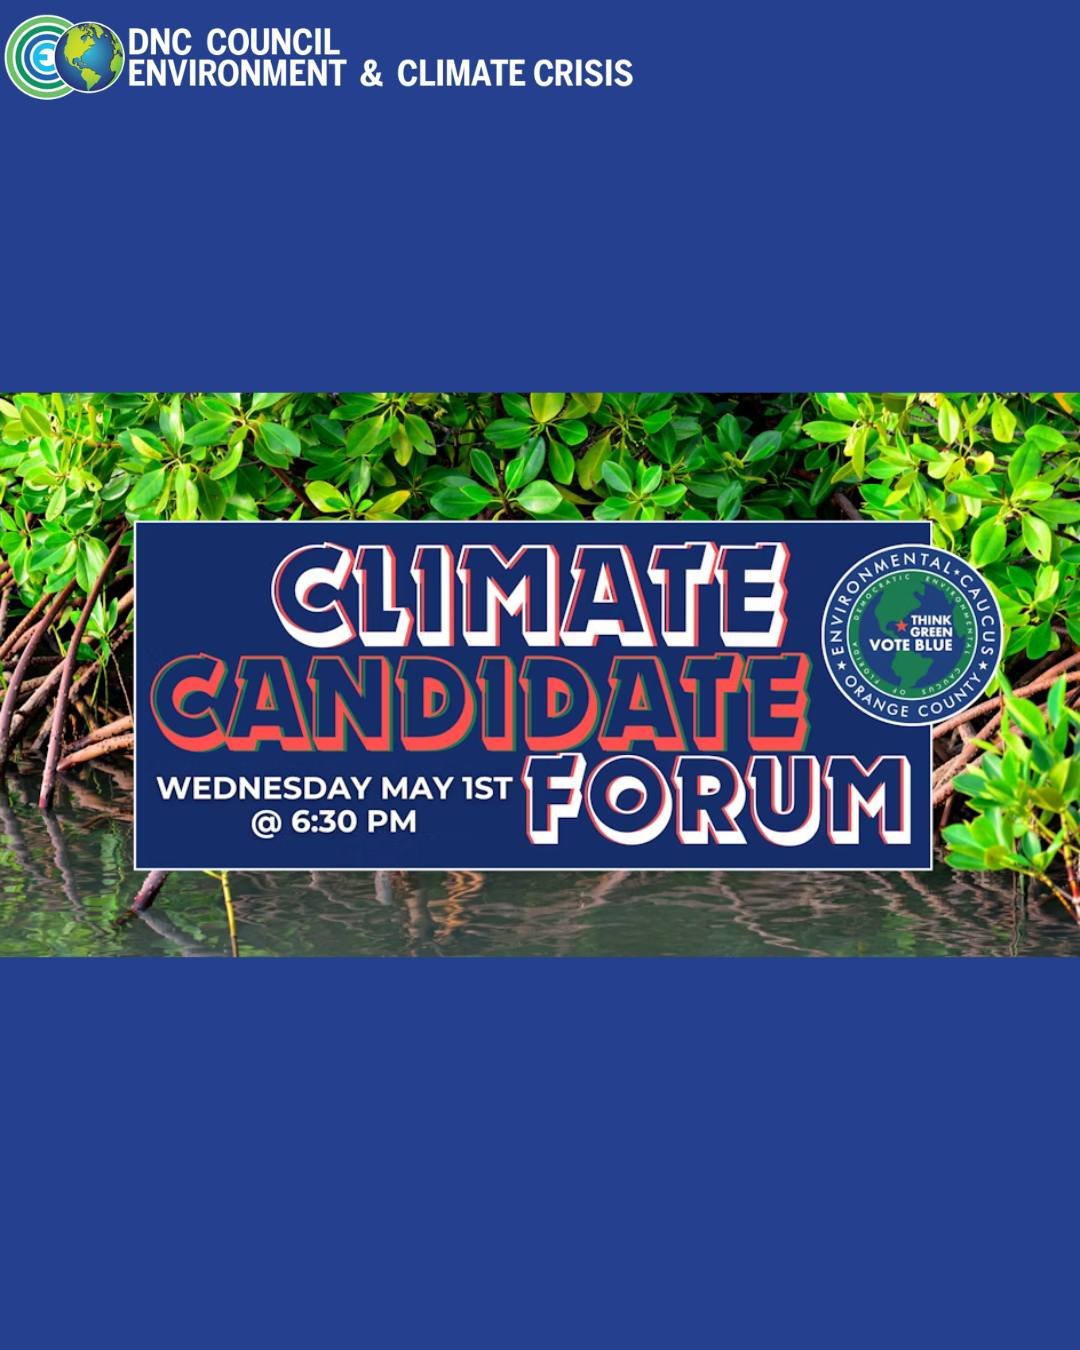 Central Florida: Hear from your potential representatives and inform your voting based on candidates' proposed environmental agendas at this Climate Candidate Forum! Organized by the Orange County Democratic Environmental Caucus of Florida this event